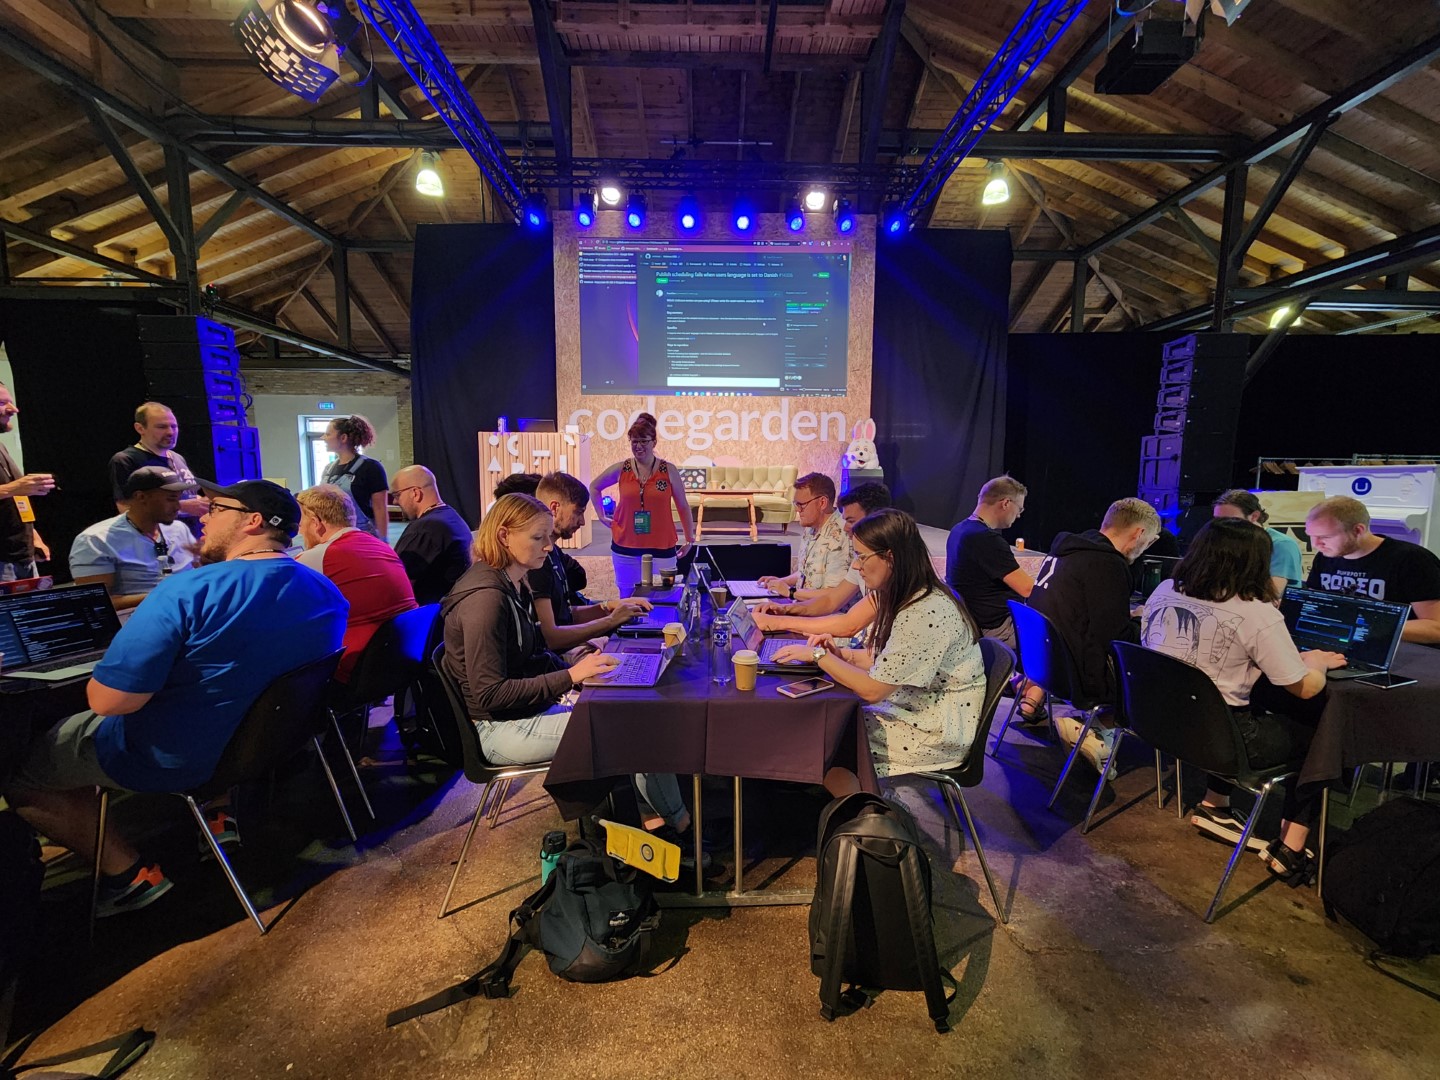 A group of people sitting at tables in front of the code garden stage participating in the hack-a-thon.